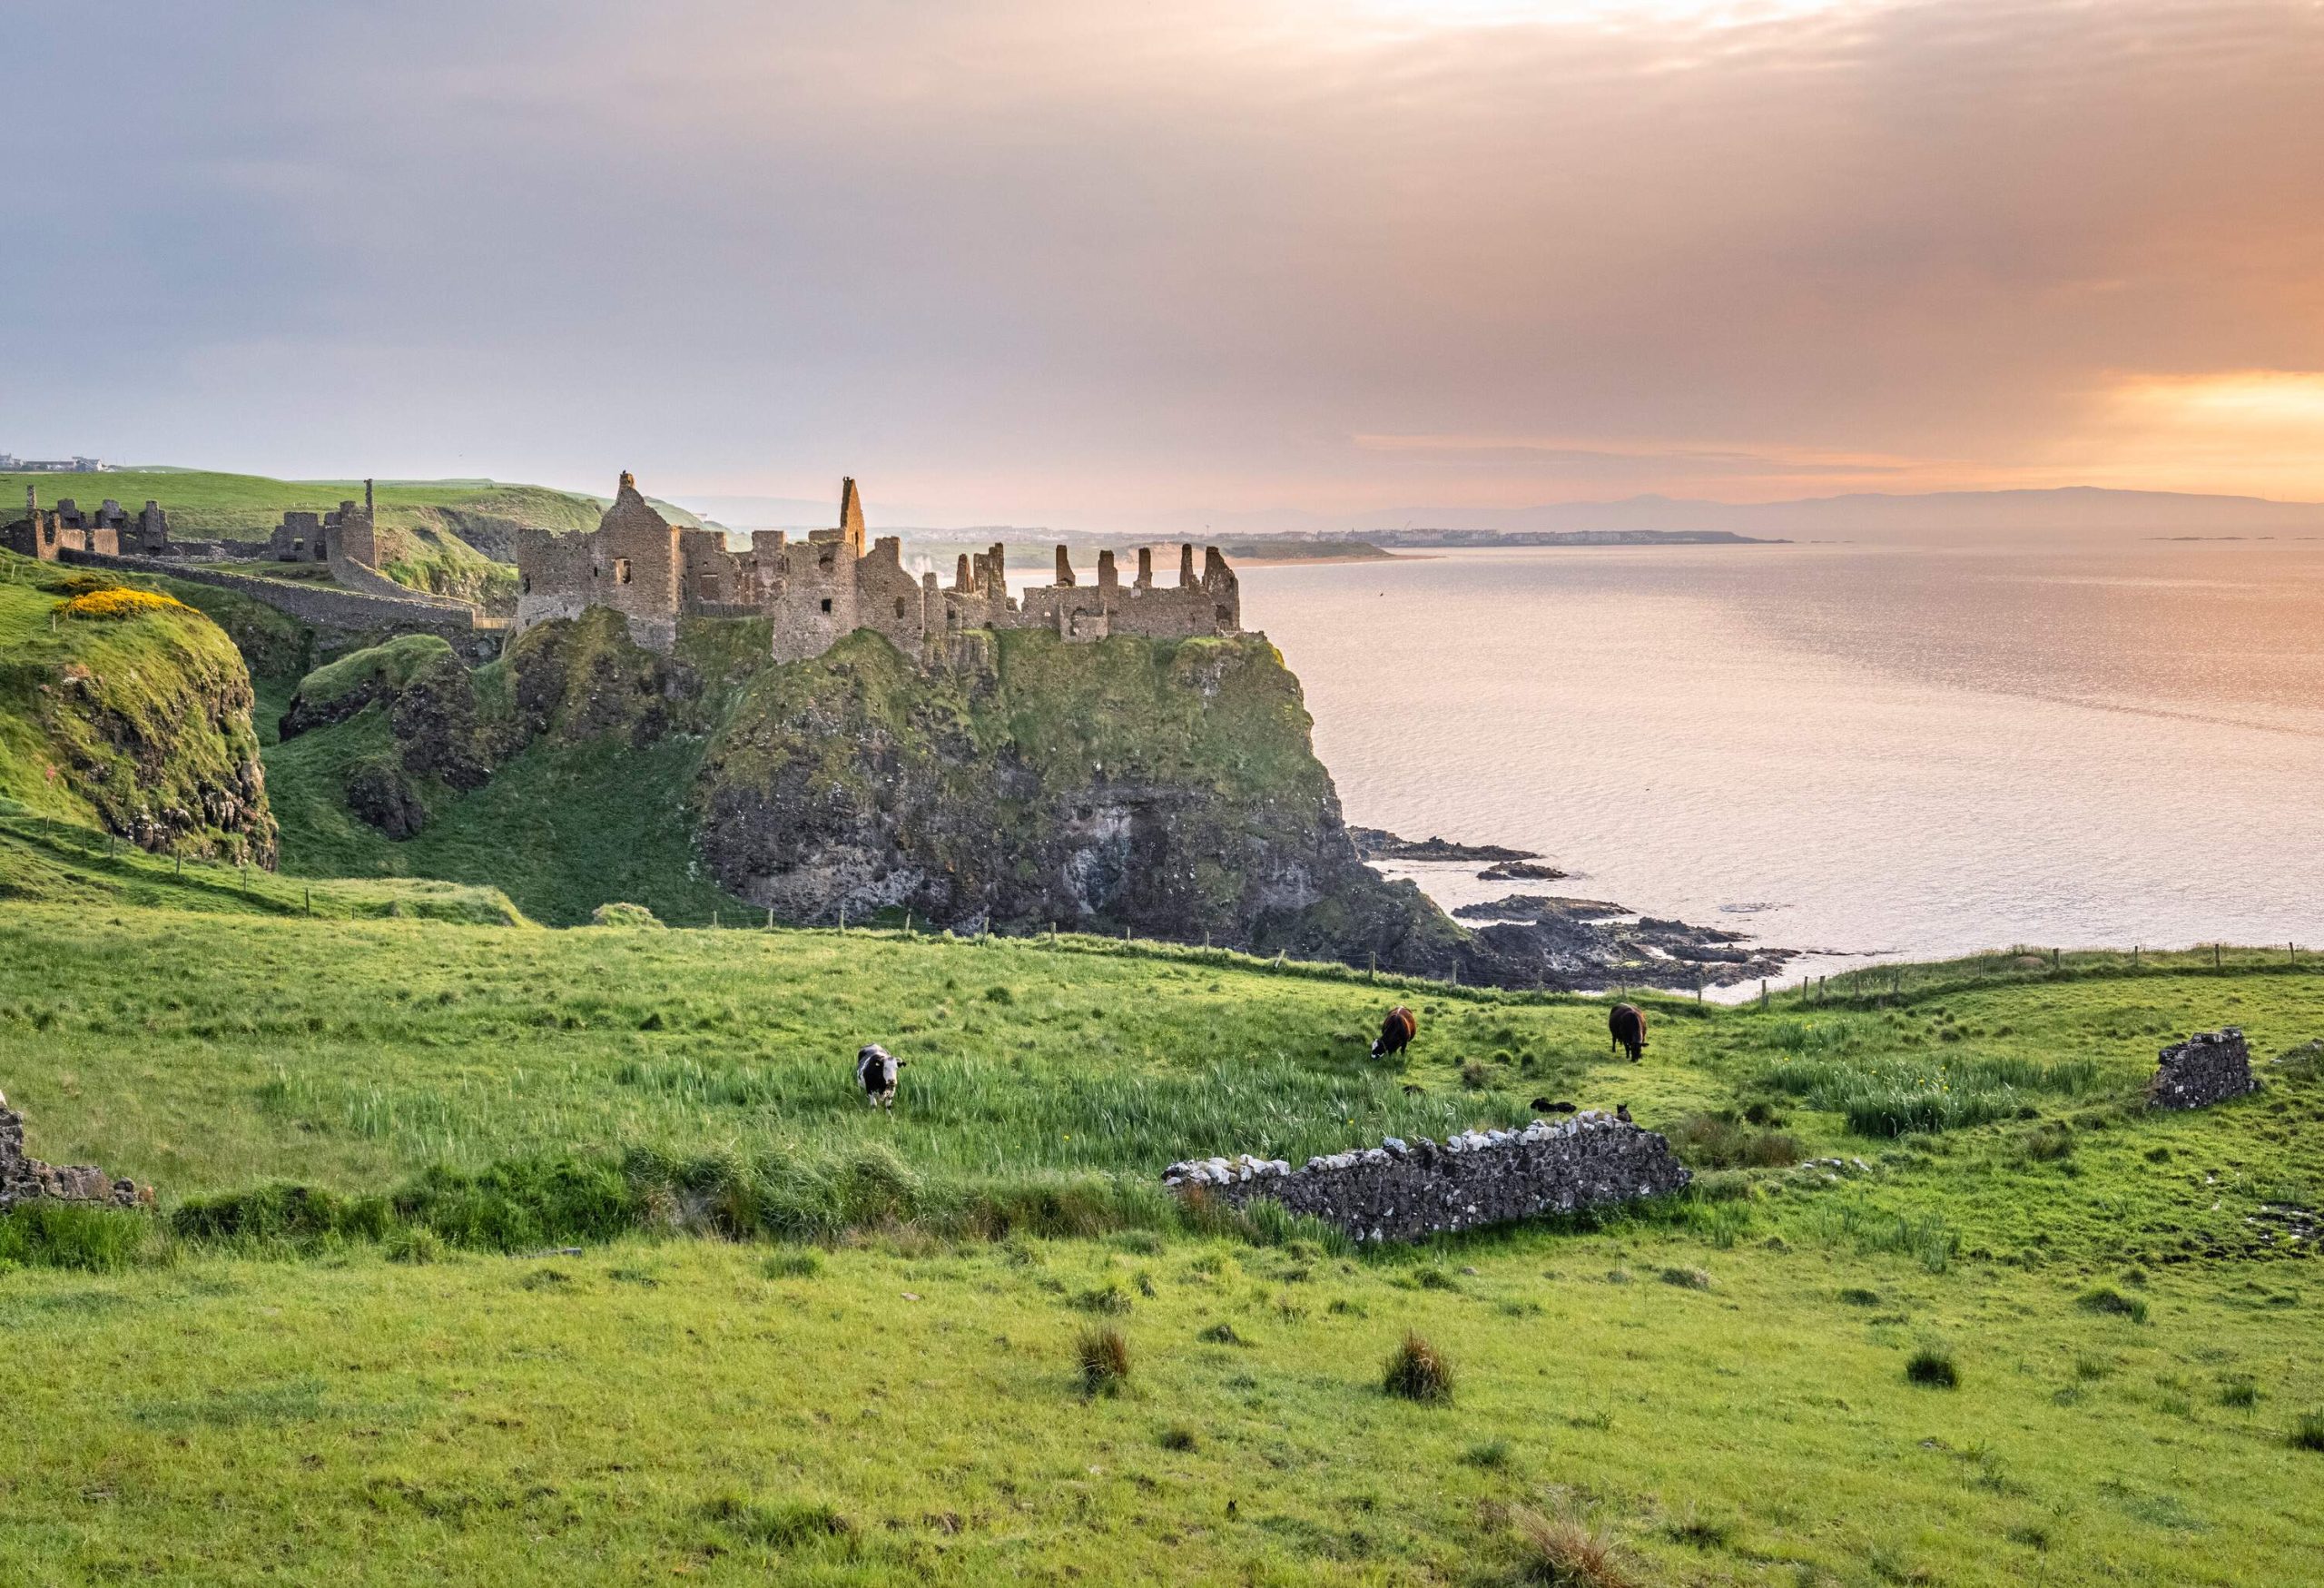 A ruined castle perched on a coastal cliff overlooking a vast ocean as seen from a greenfield with grazing cows.